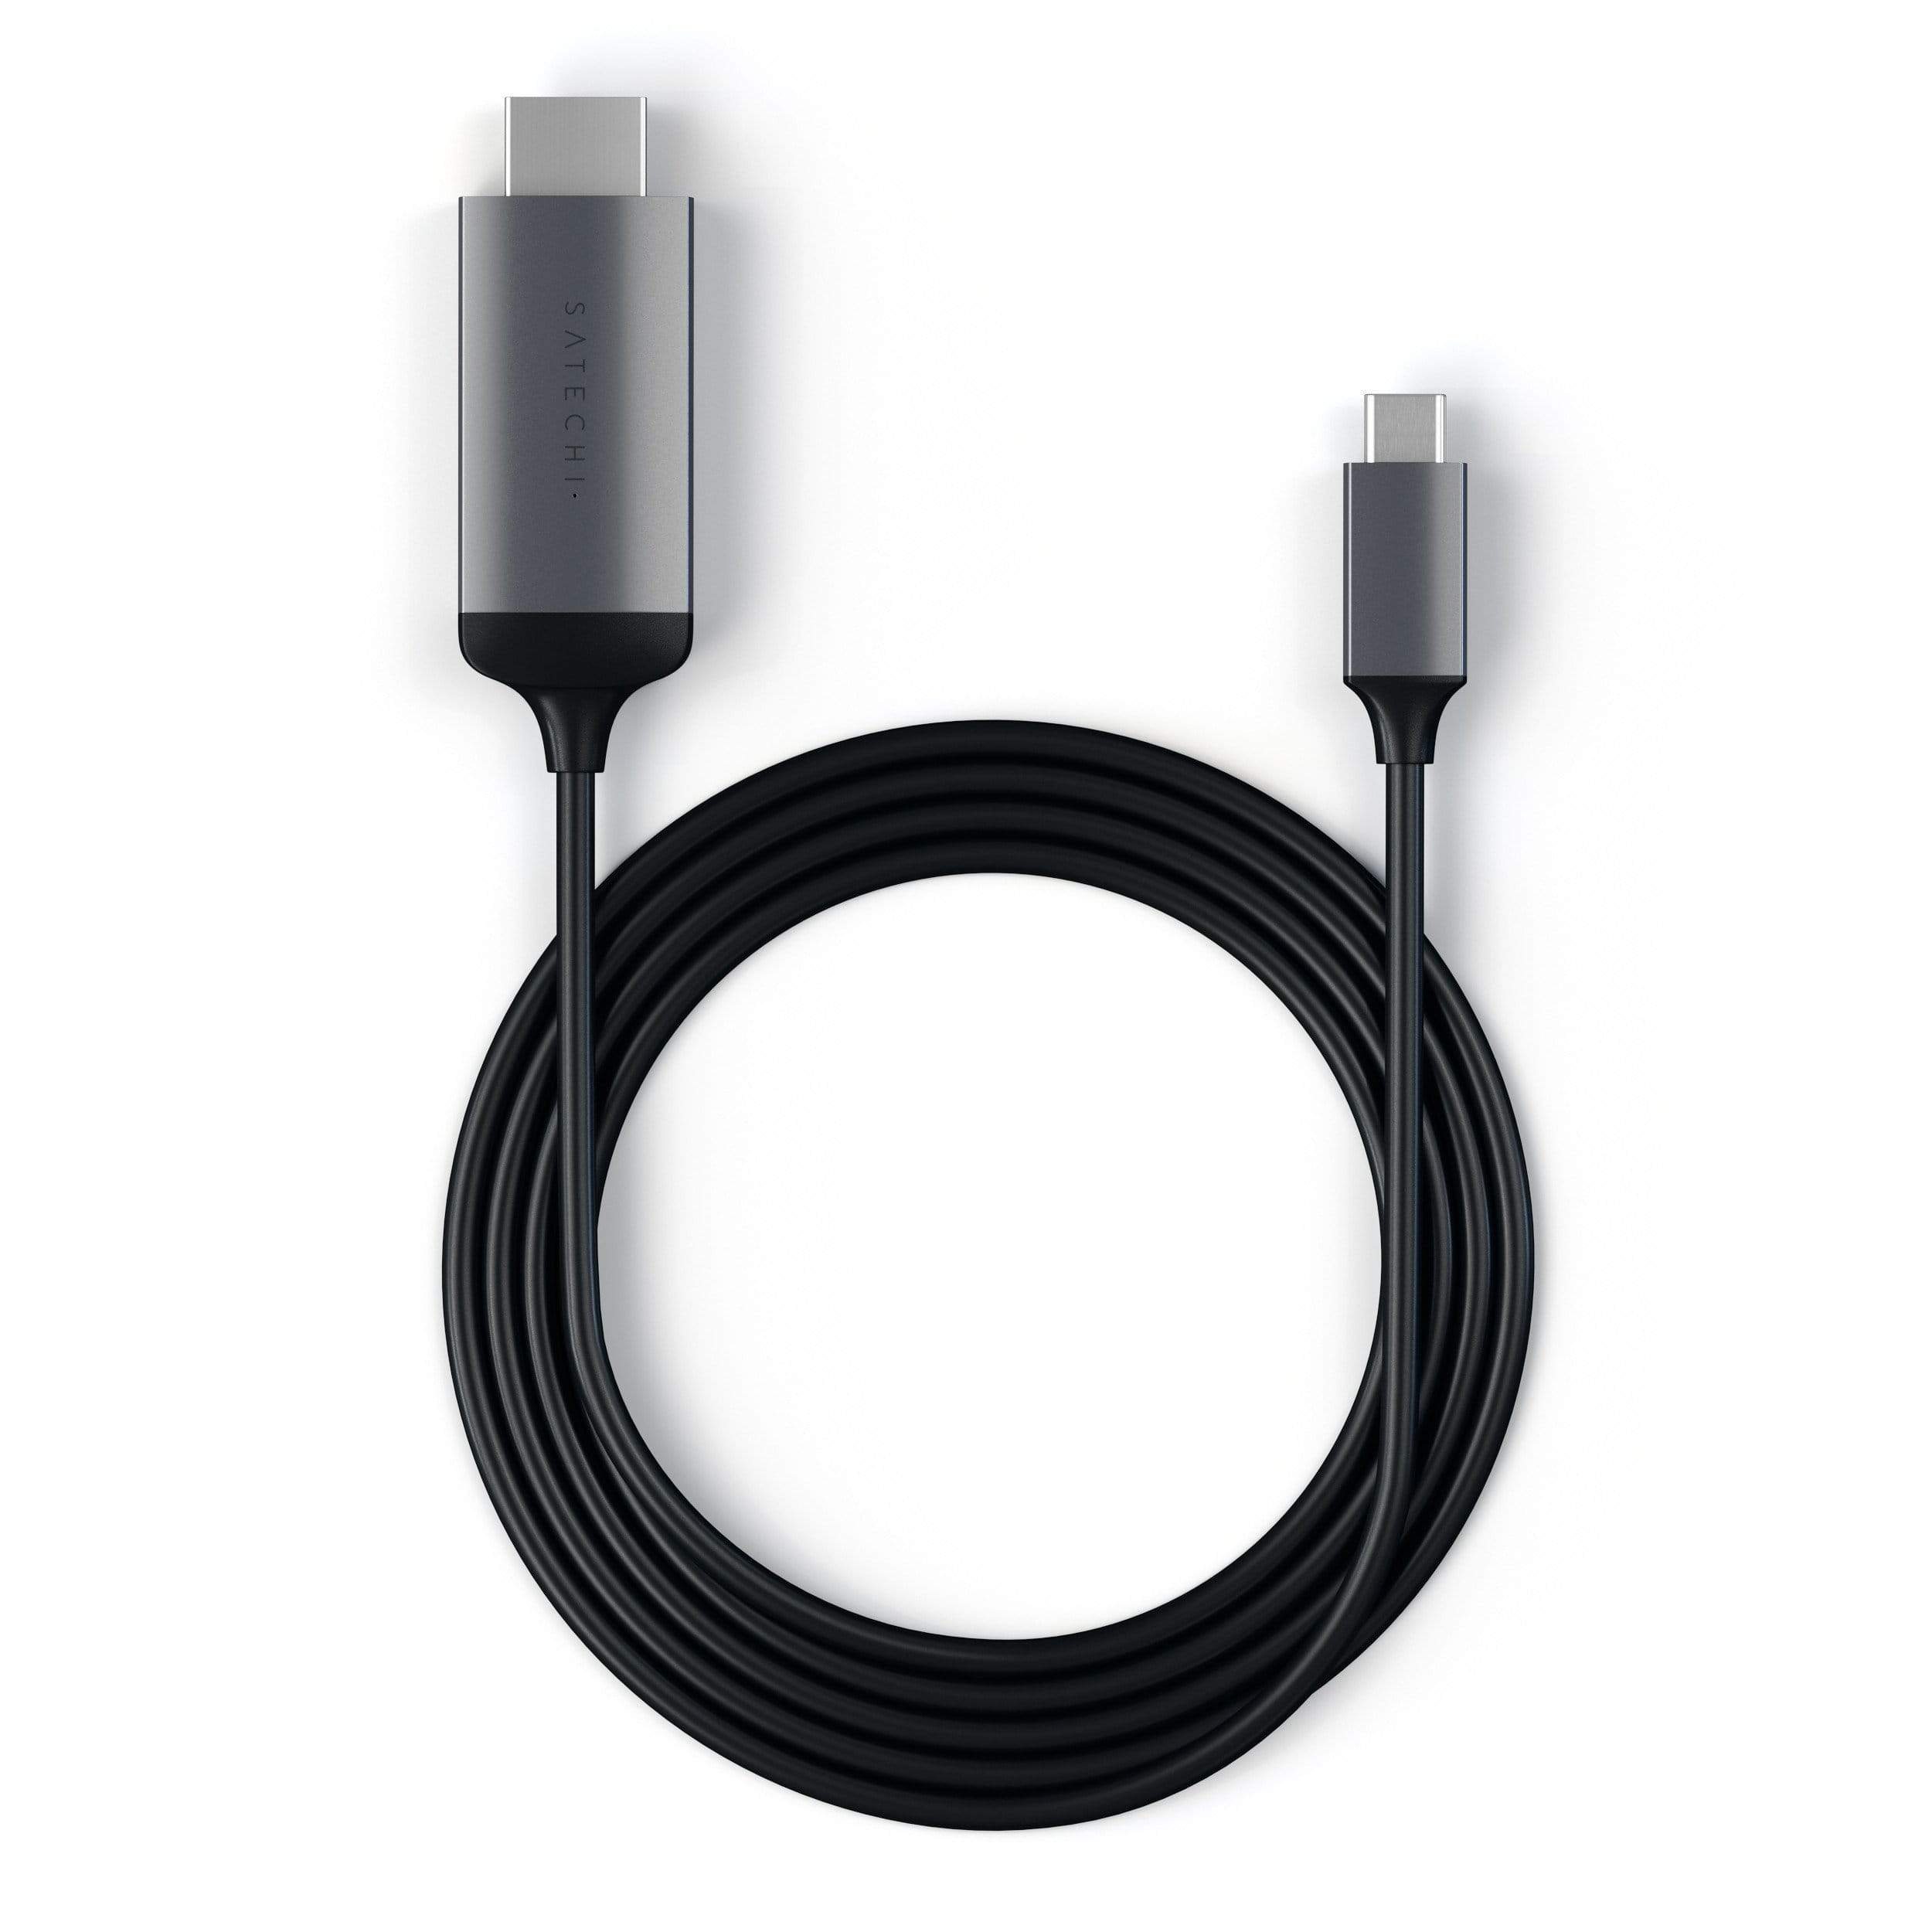 USB Type-C to HDMI Cable 4K 60Hz - Satechi